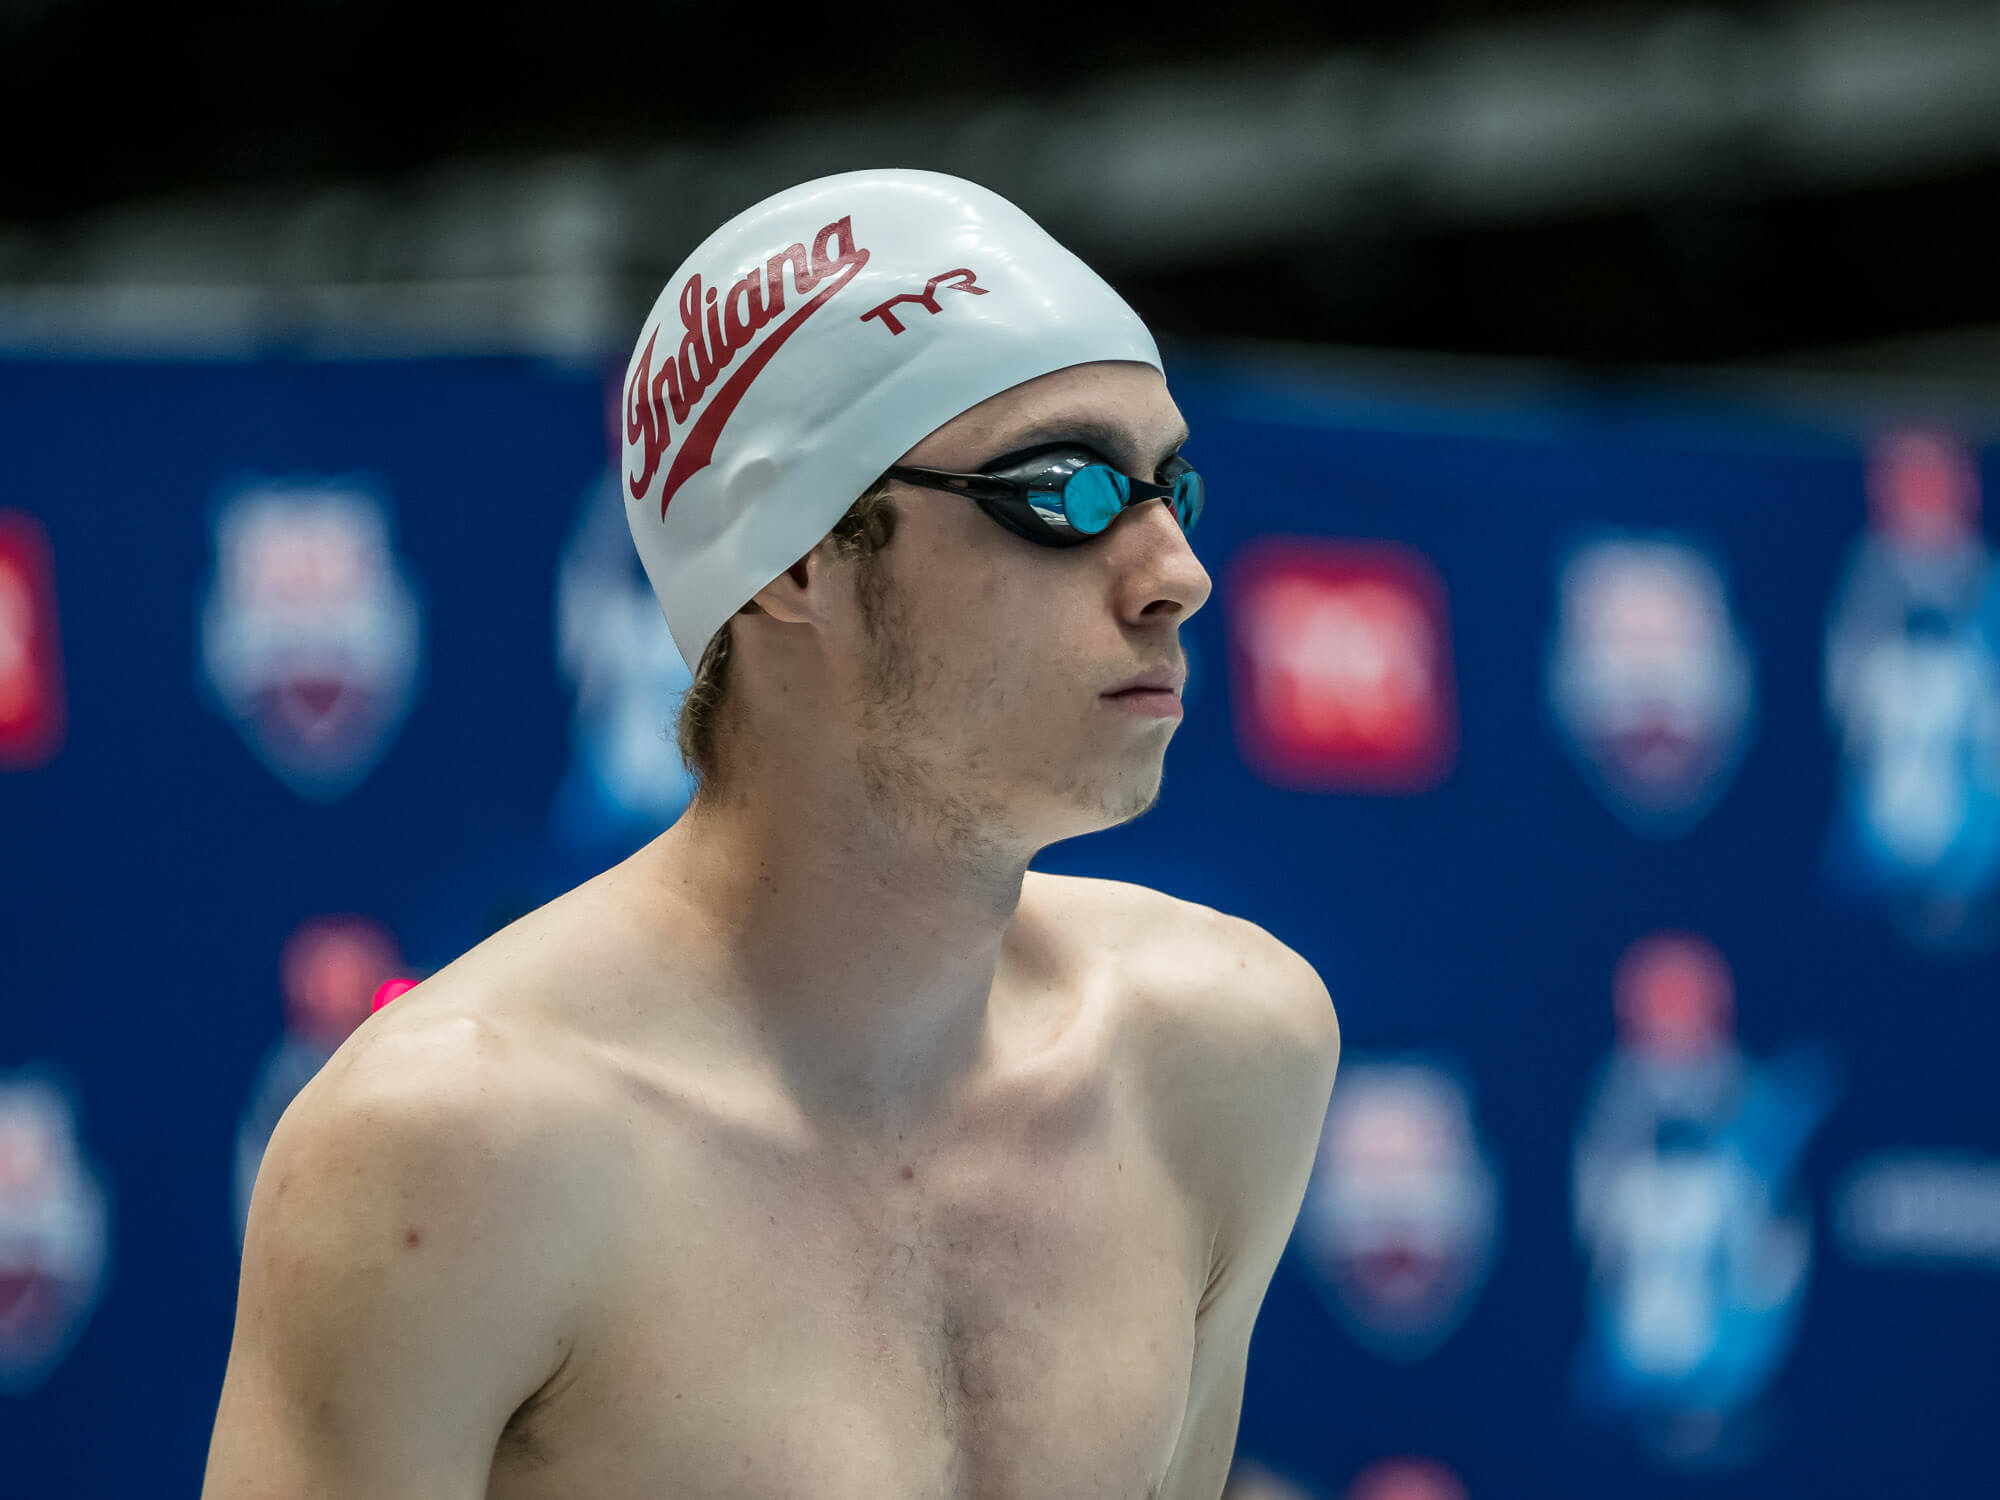 2021 Big Ten Men's Swimming Championships Day Three Heats Indiana Scores Four Up in 100 Fly